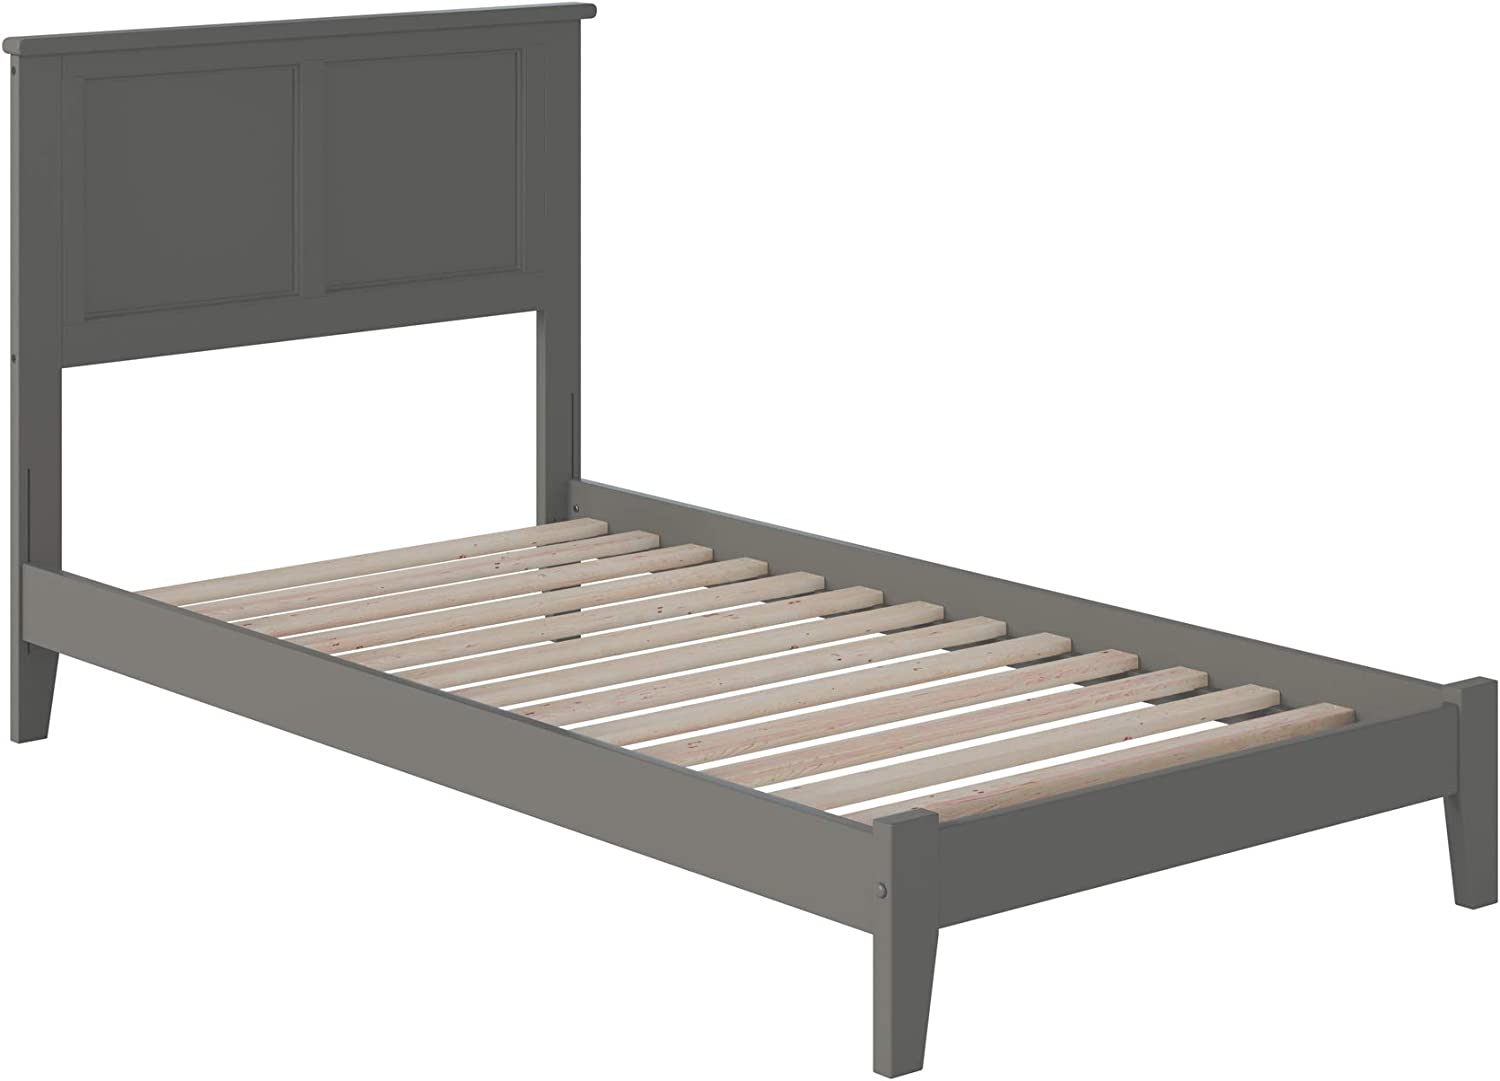 AFI Atlantic Furniture AR8611009 Madison Platform Bed with Open Foot Board, Twin XL, Grey